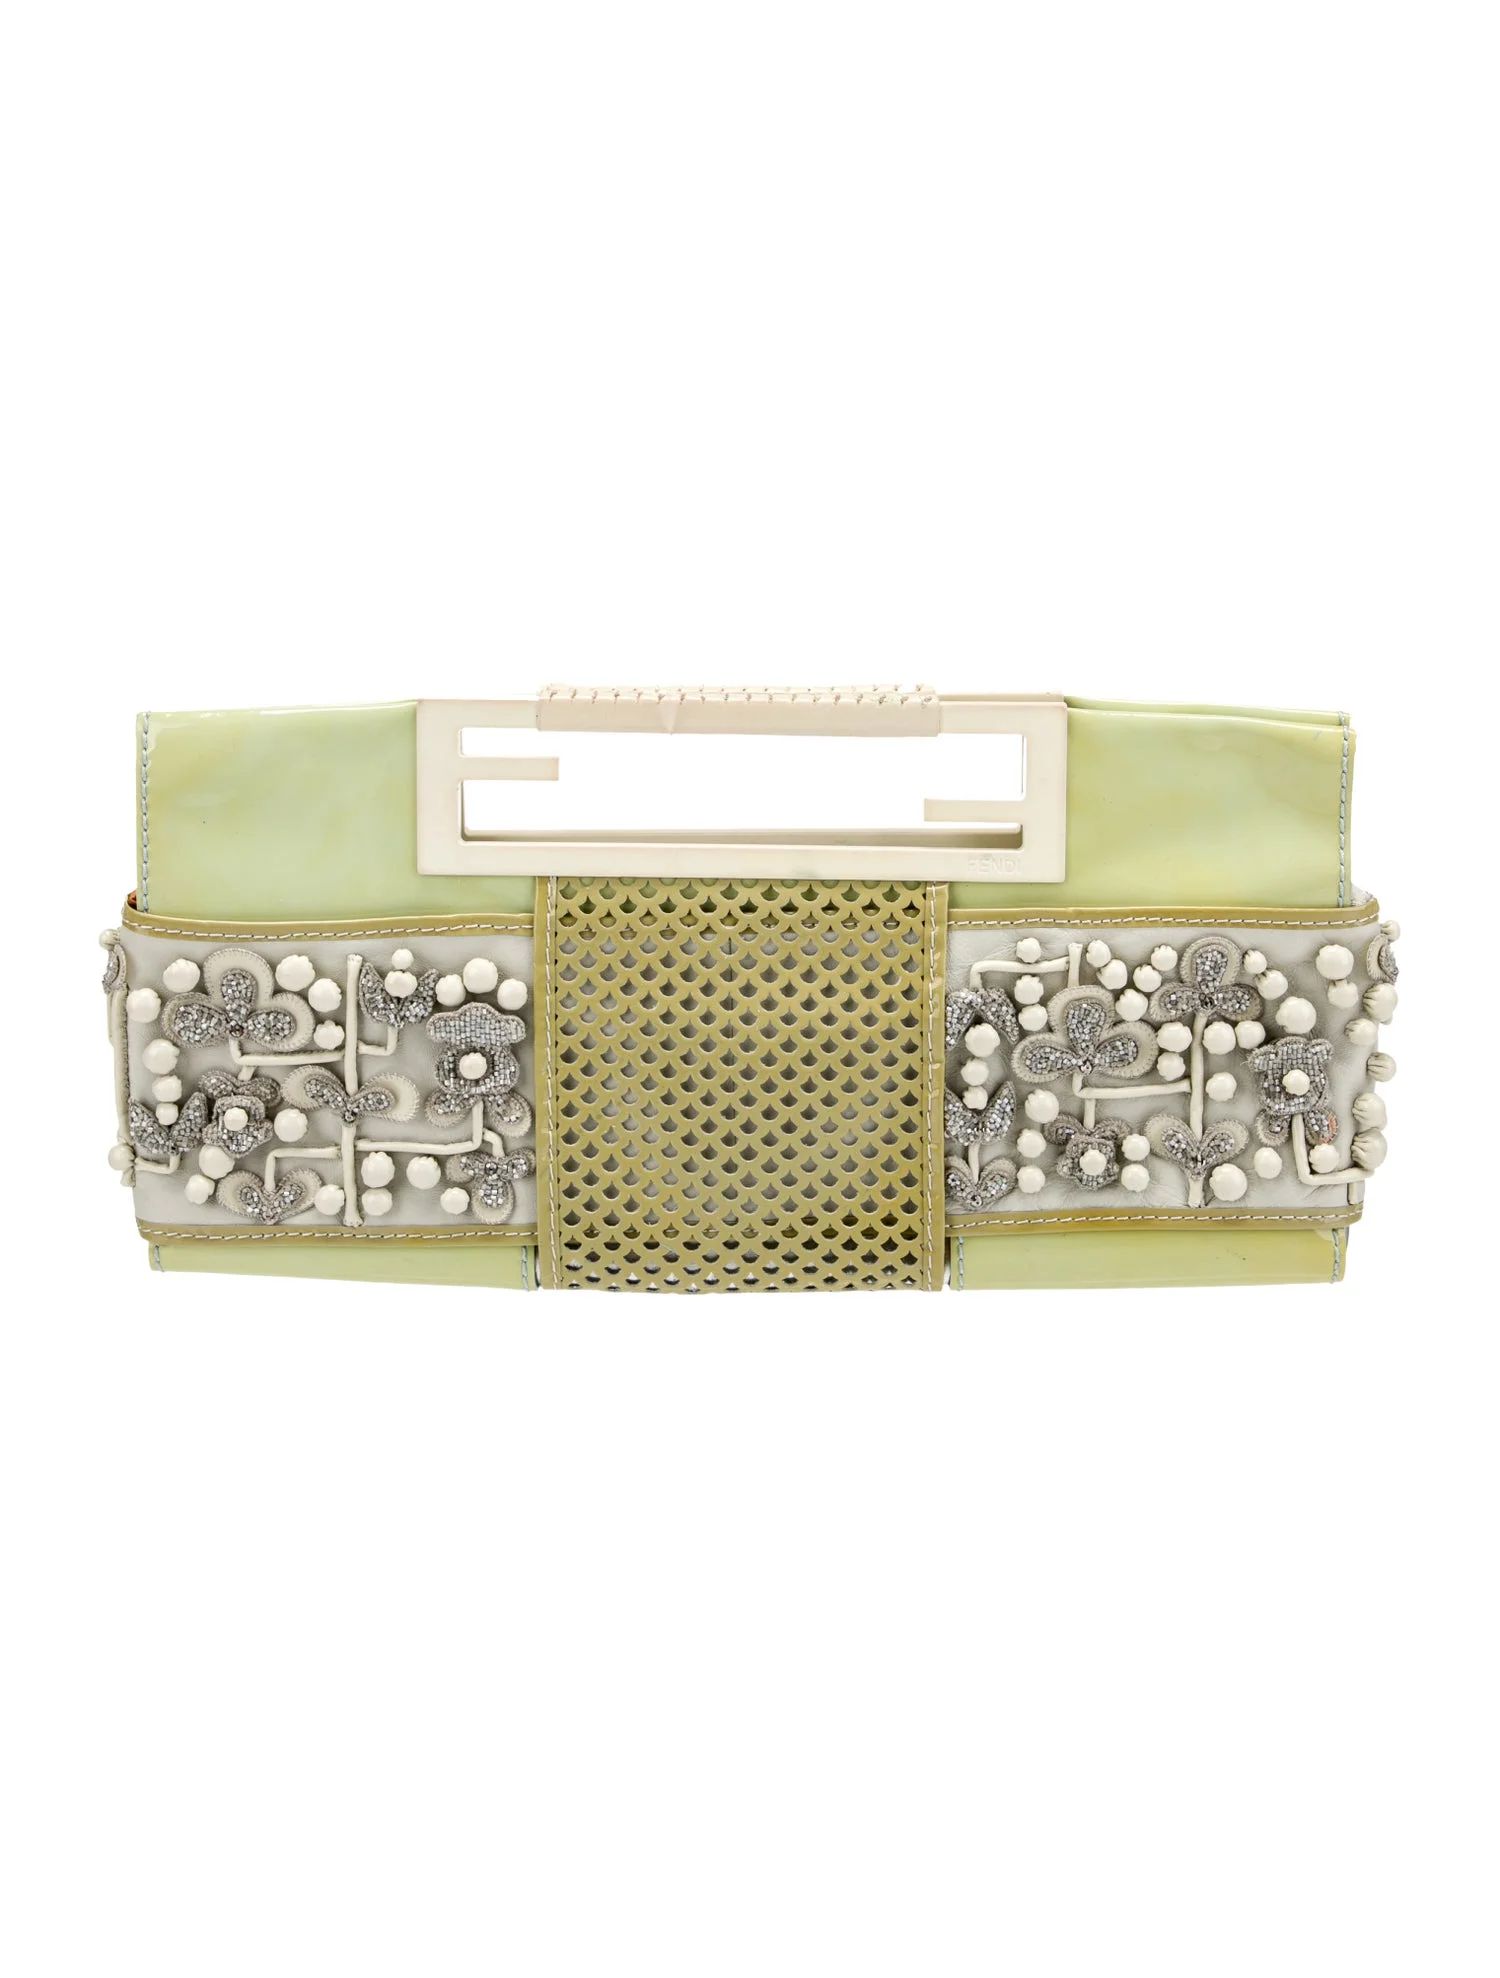 Embellished Patent Leather Clutch | The RealReal